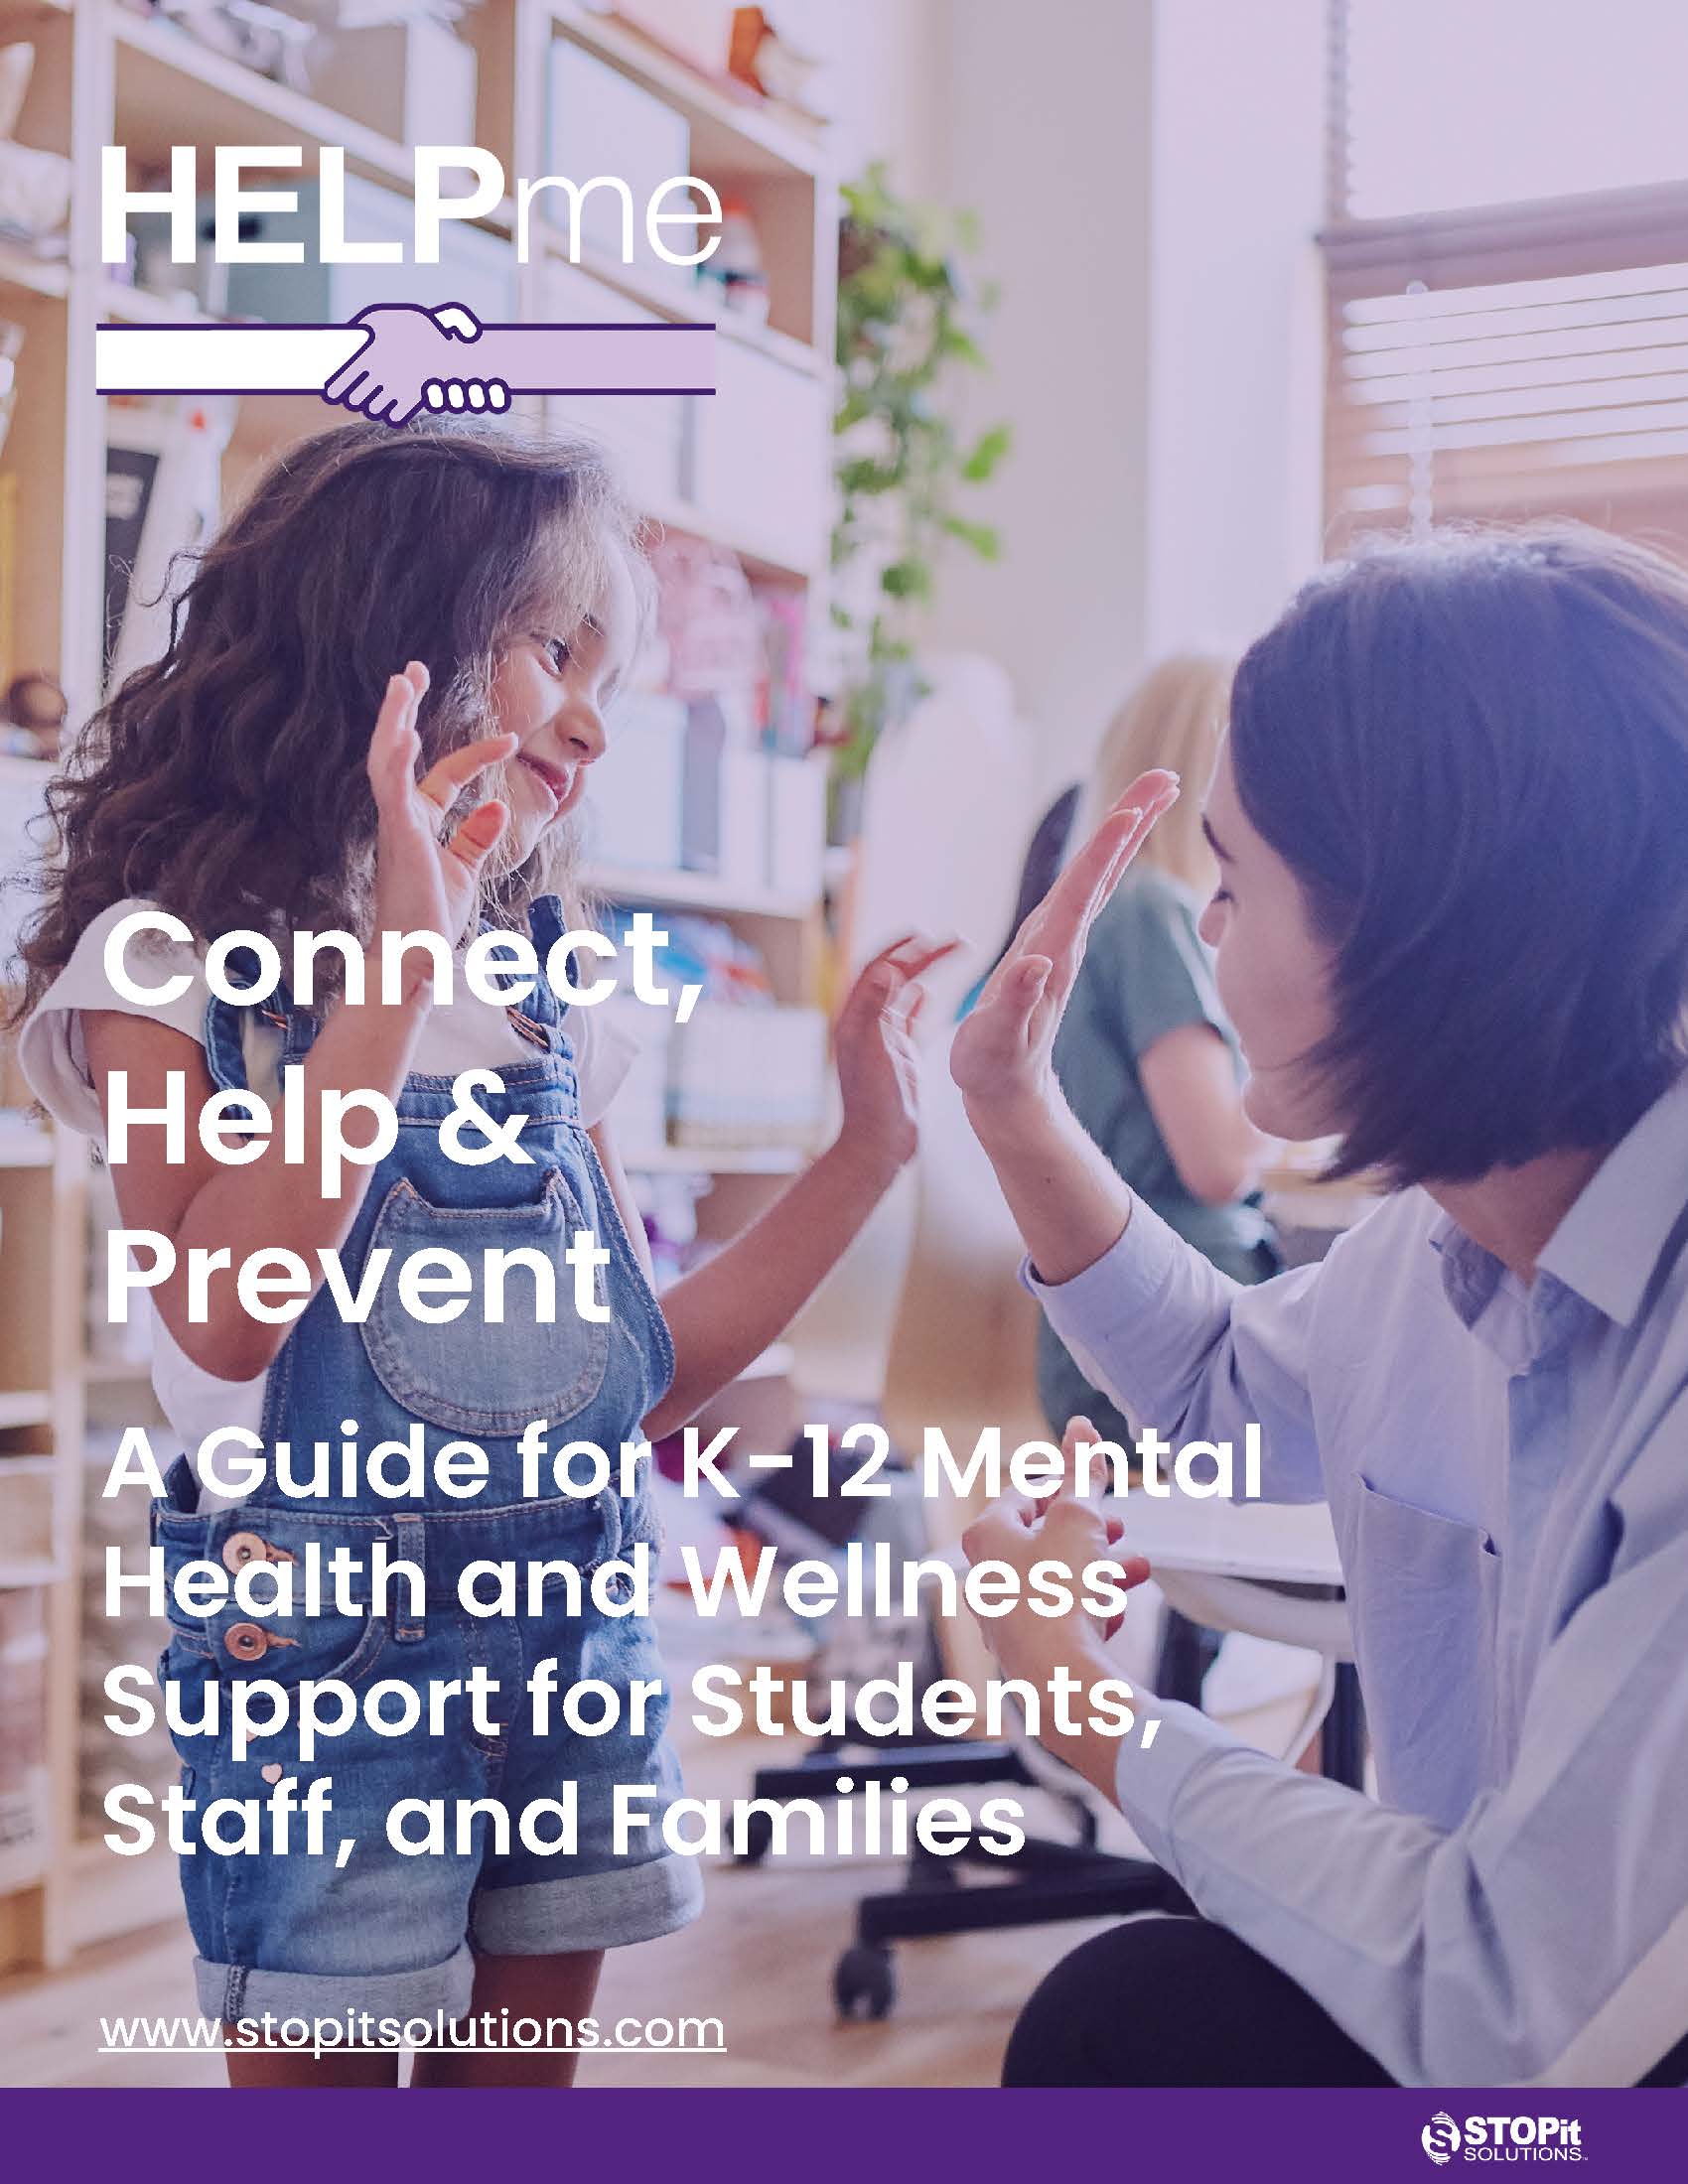 A Guide for K-12 Mental Health and Wellness Support for Students, Staff, and Families 71222_Page_01